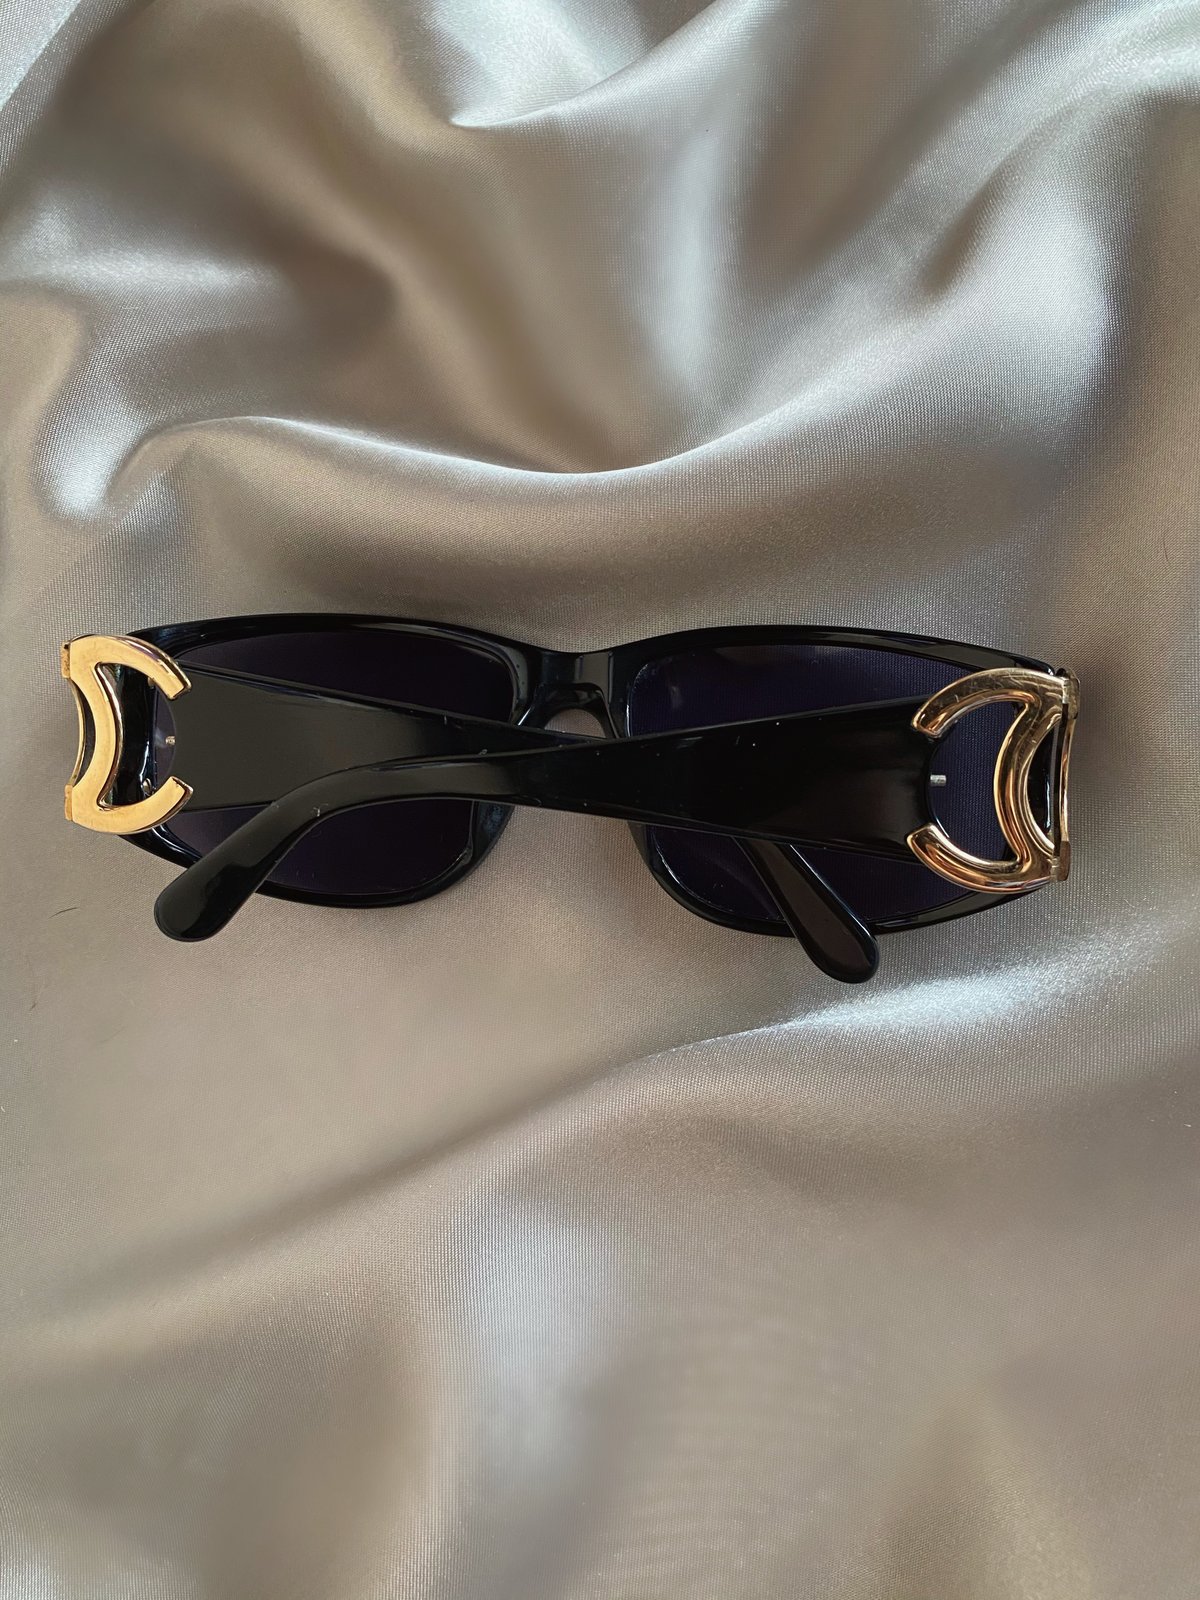 New Fashion Designer Sunglasses Outlet For Women And Men UV 400 Protection,  Double Beam, Big Frame, Diamond Accents Outdoor Brands Model 9273/350 From  Handsupplease, $5.2 | DHgate.Com